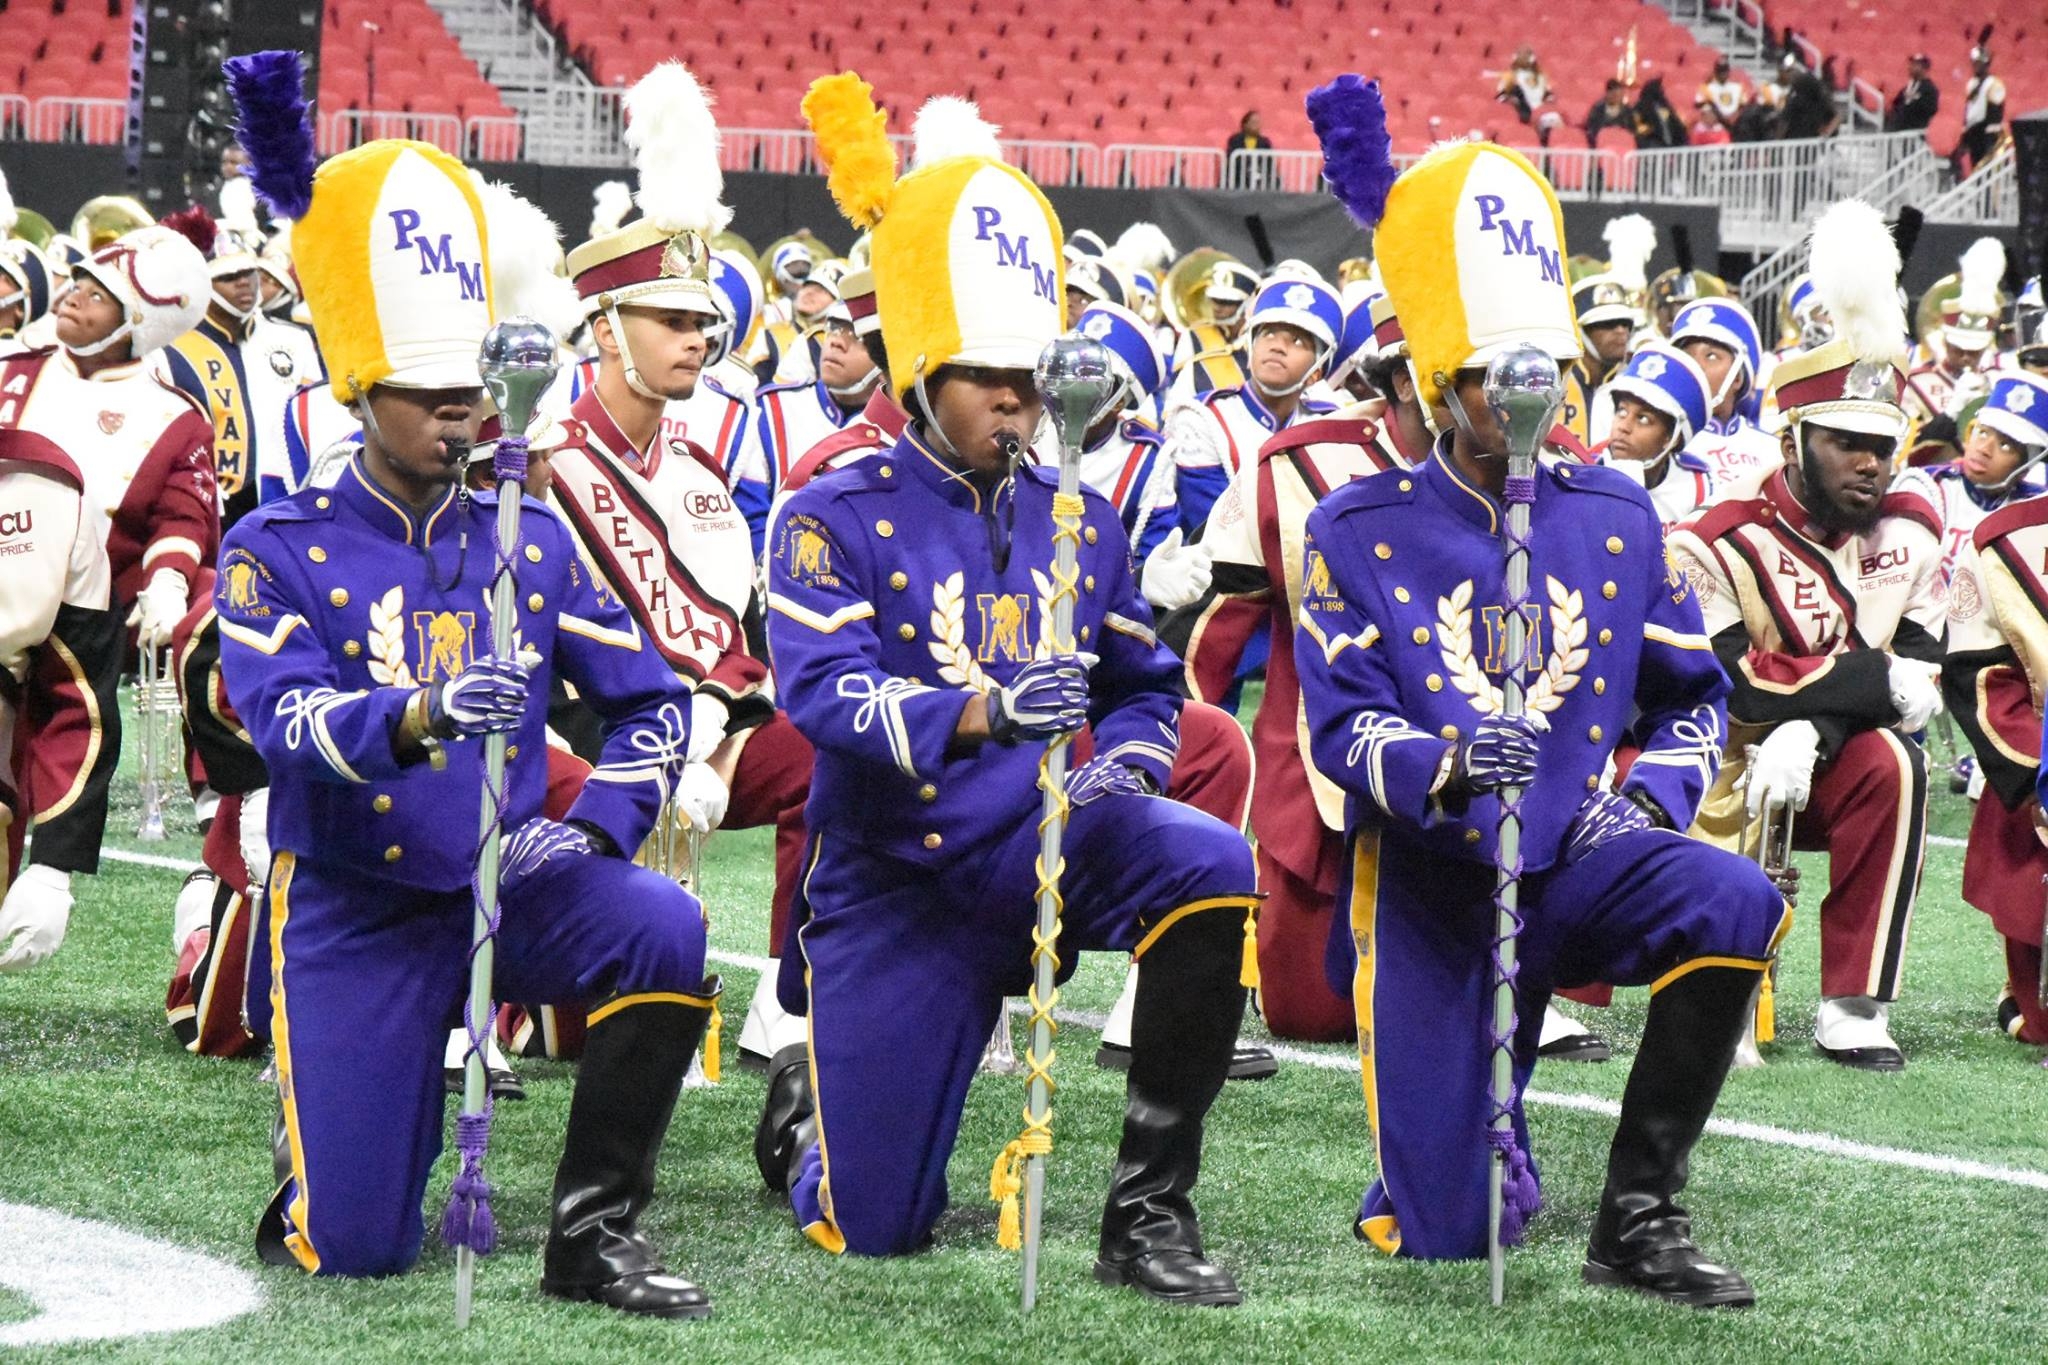 27504059 1825788087454946 2669666993516348361 o Don’t miss the Historic Battle for Birmingham with HBC bands. Sunday, Sept. 15th